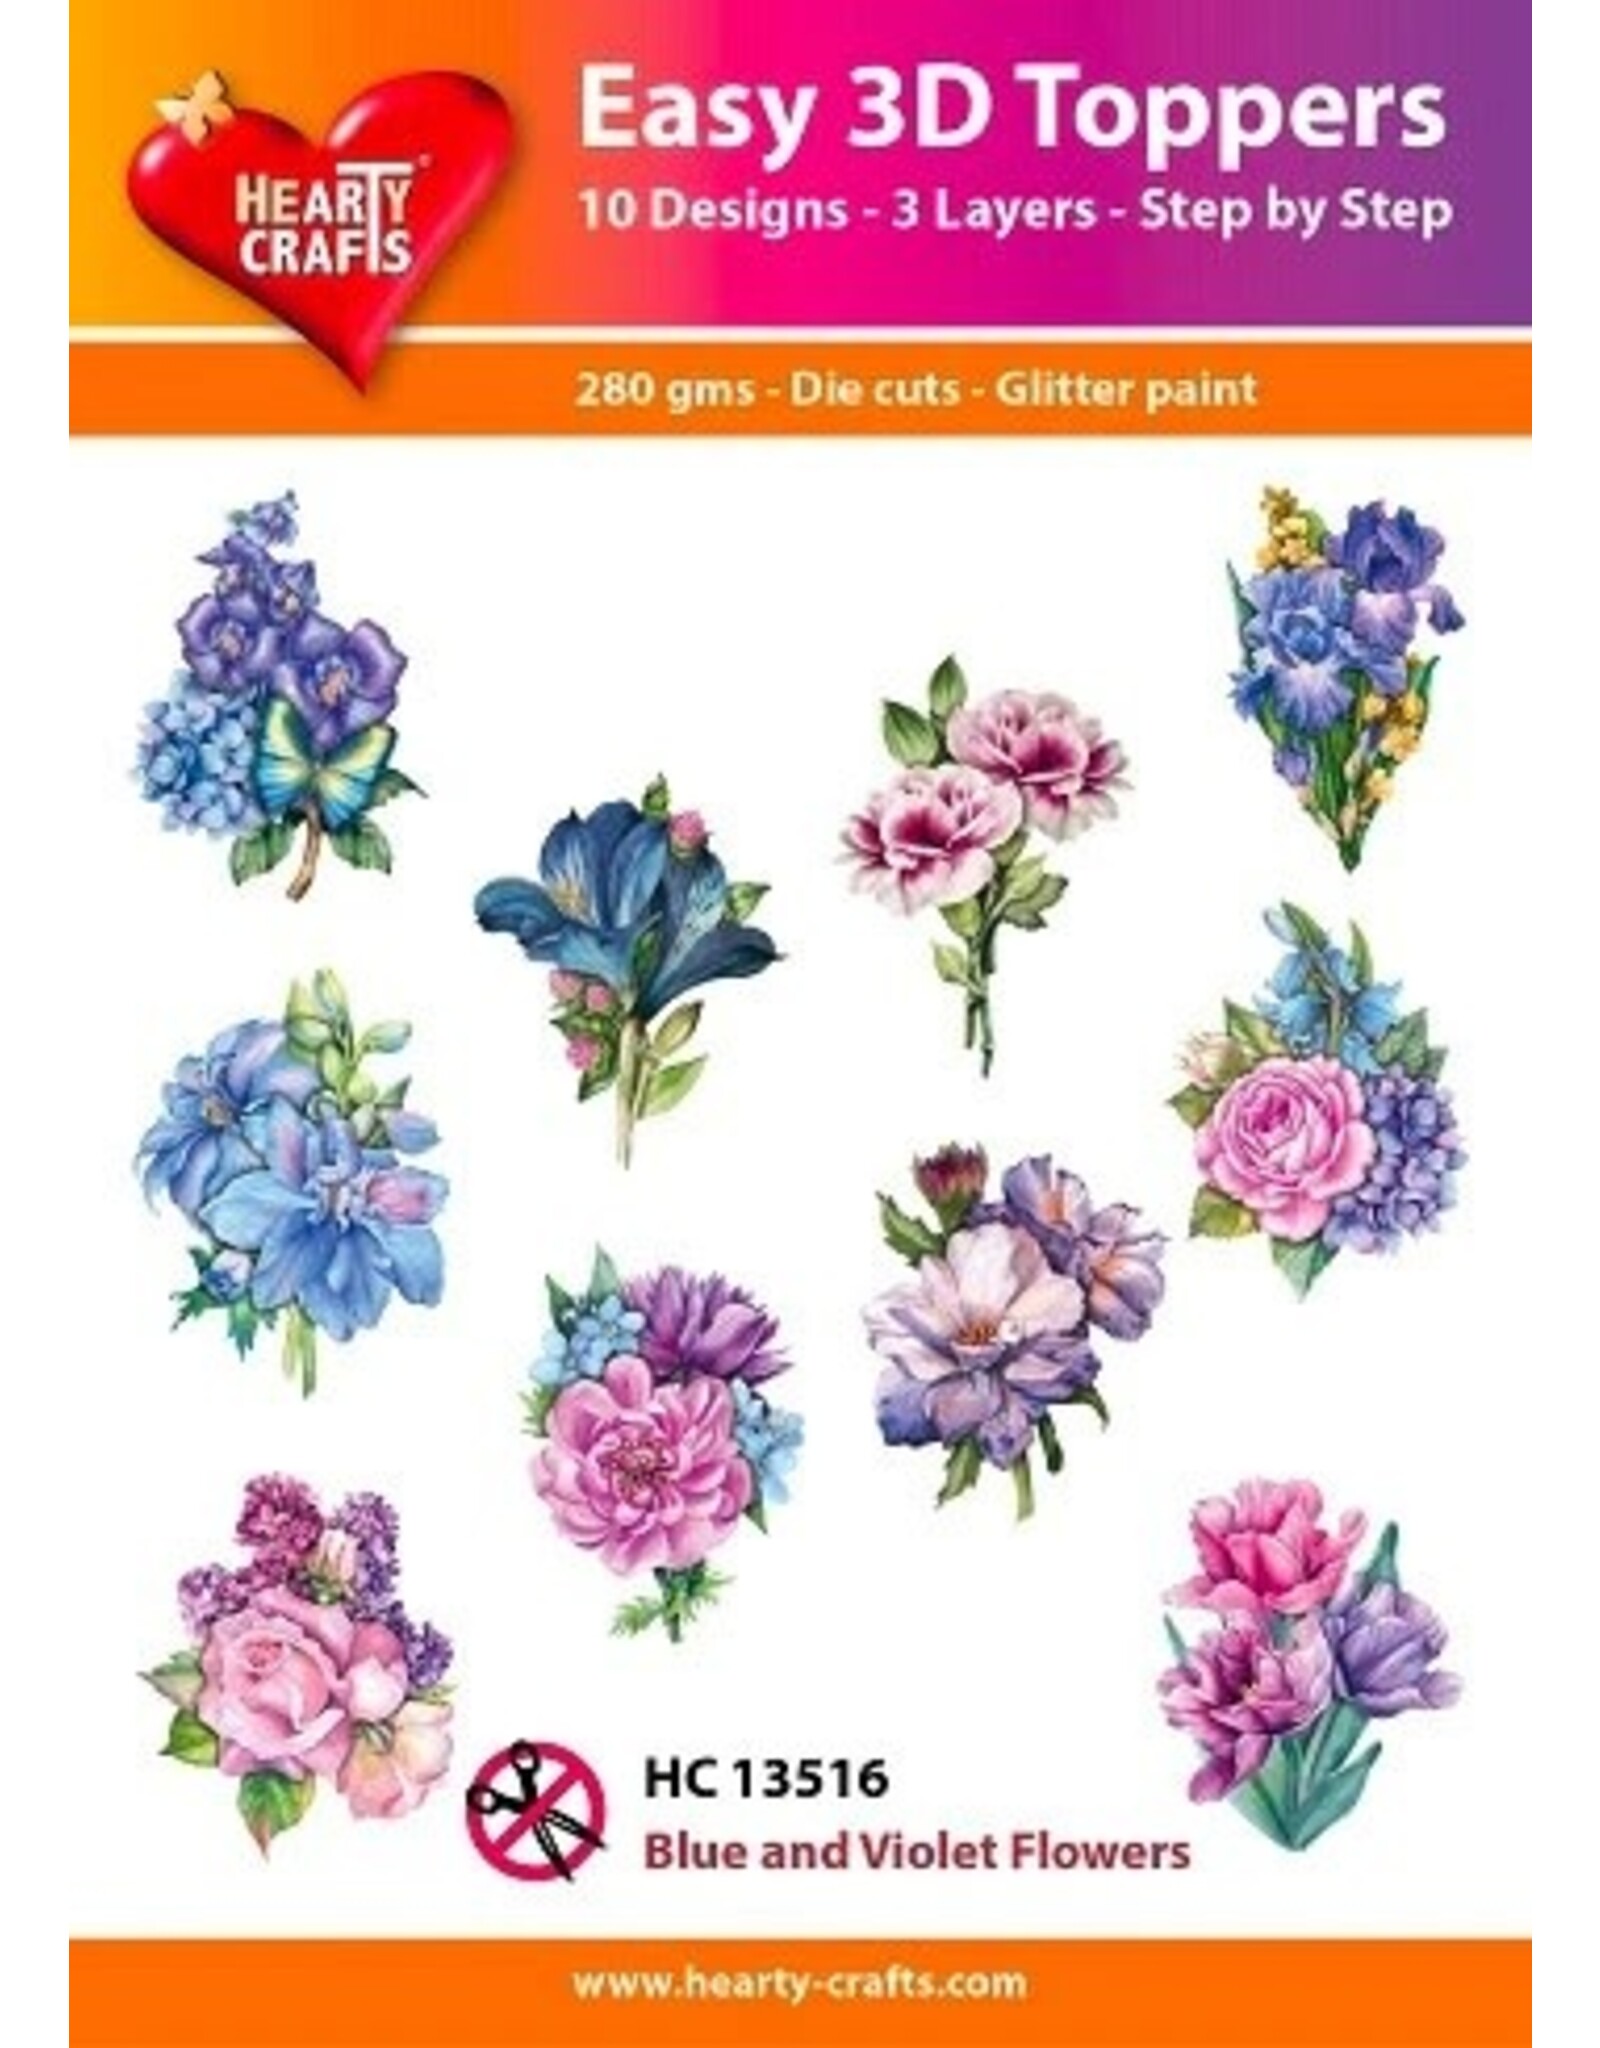 HEARTY CRAFTS HEARTY CRAFTS BLUE & VIOLET FLOWERS EASY 3D TOPPERS